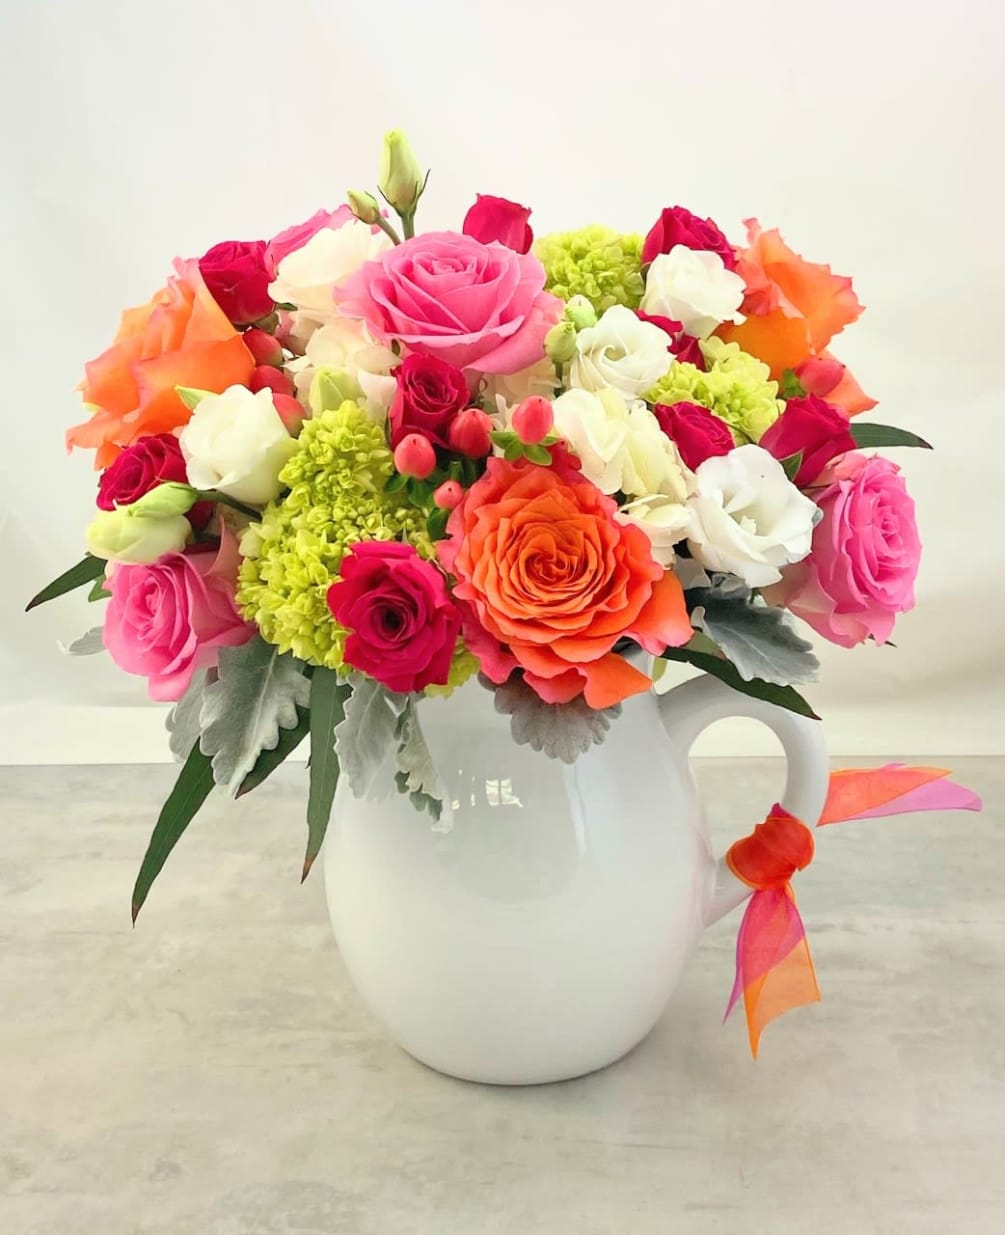 The Pitcher Perfect Bouquet is sure to bring a smile to your